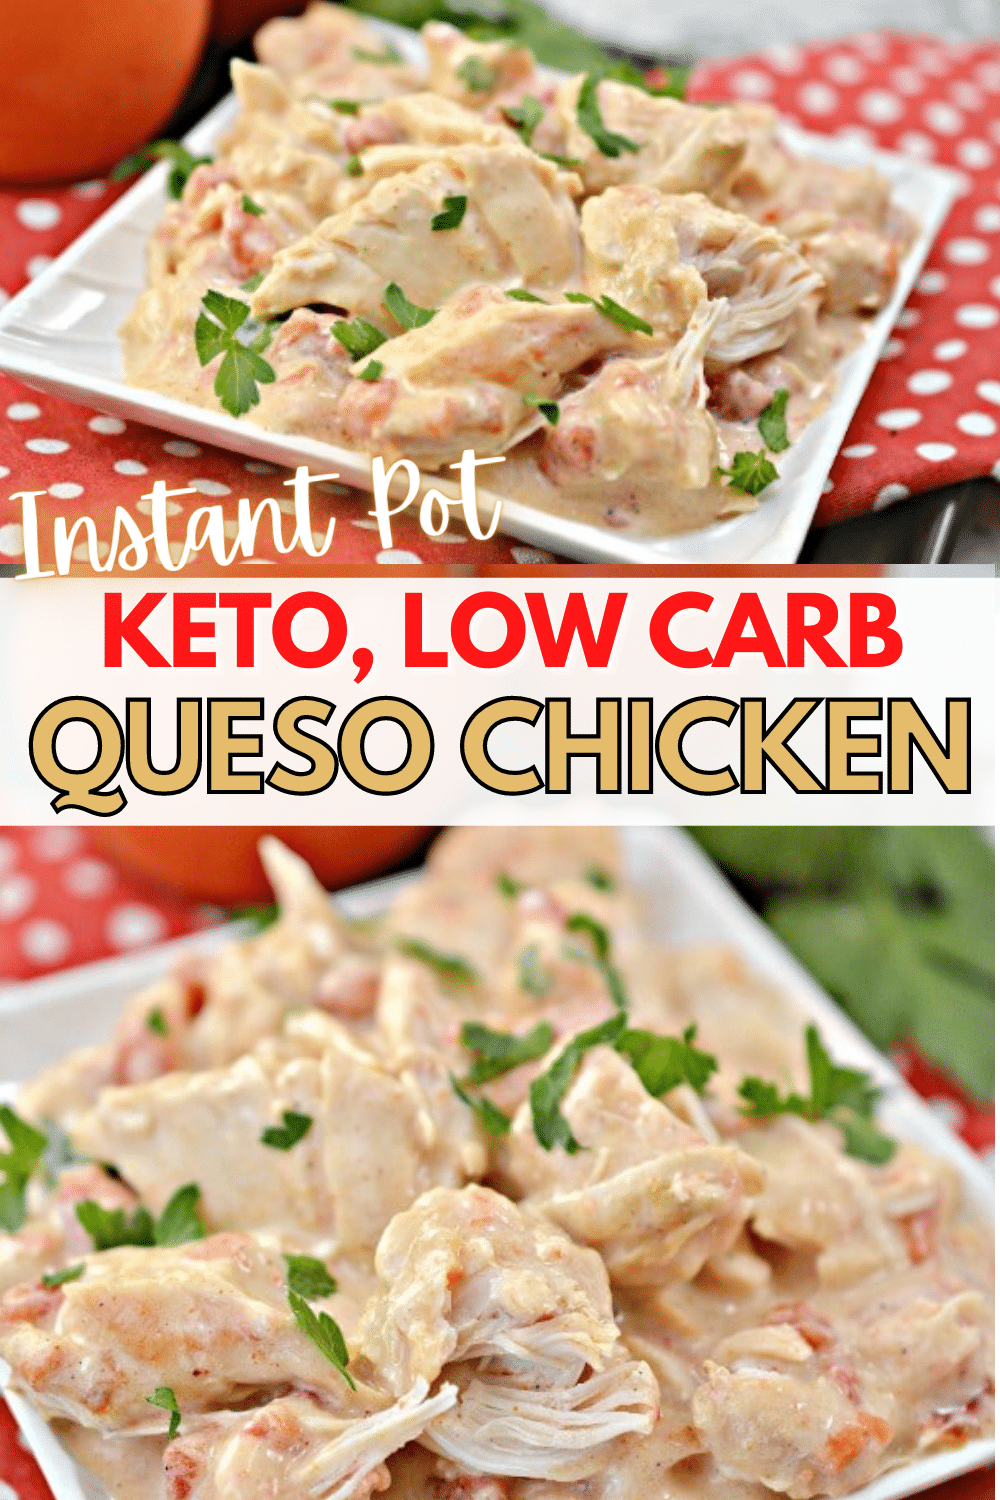 This Instant Pot Queso Chicken is not only easy and delicious, it's perfect for low-carb and keto diets too! #instantpot #chicken #mexican #keto #lowcarb via @wondermomwannab